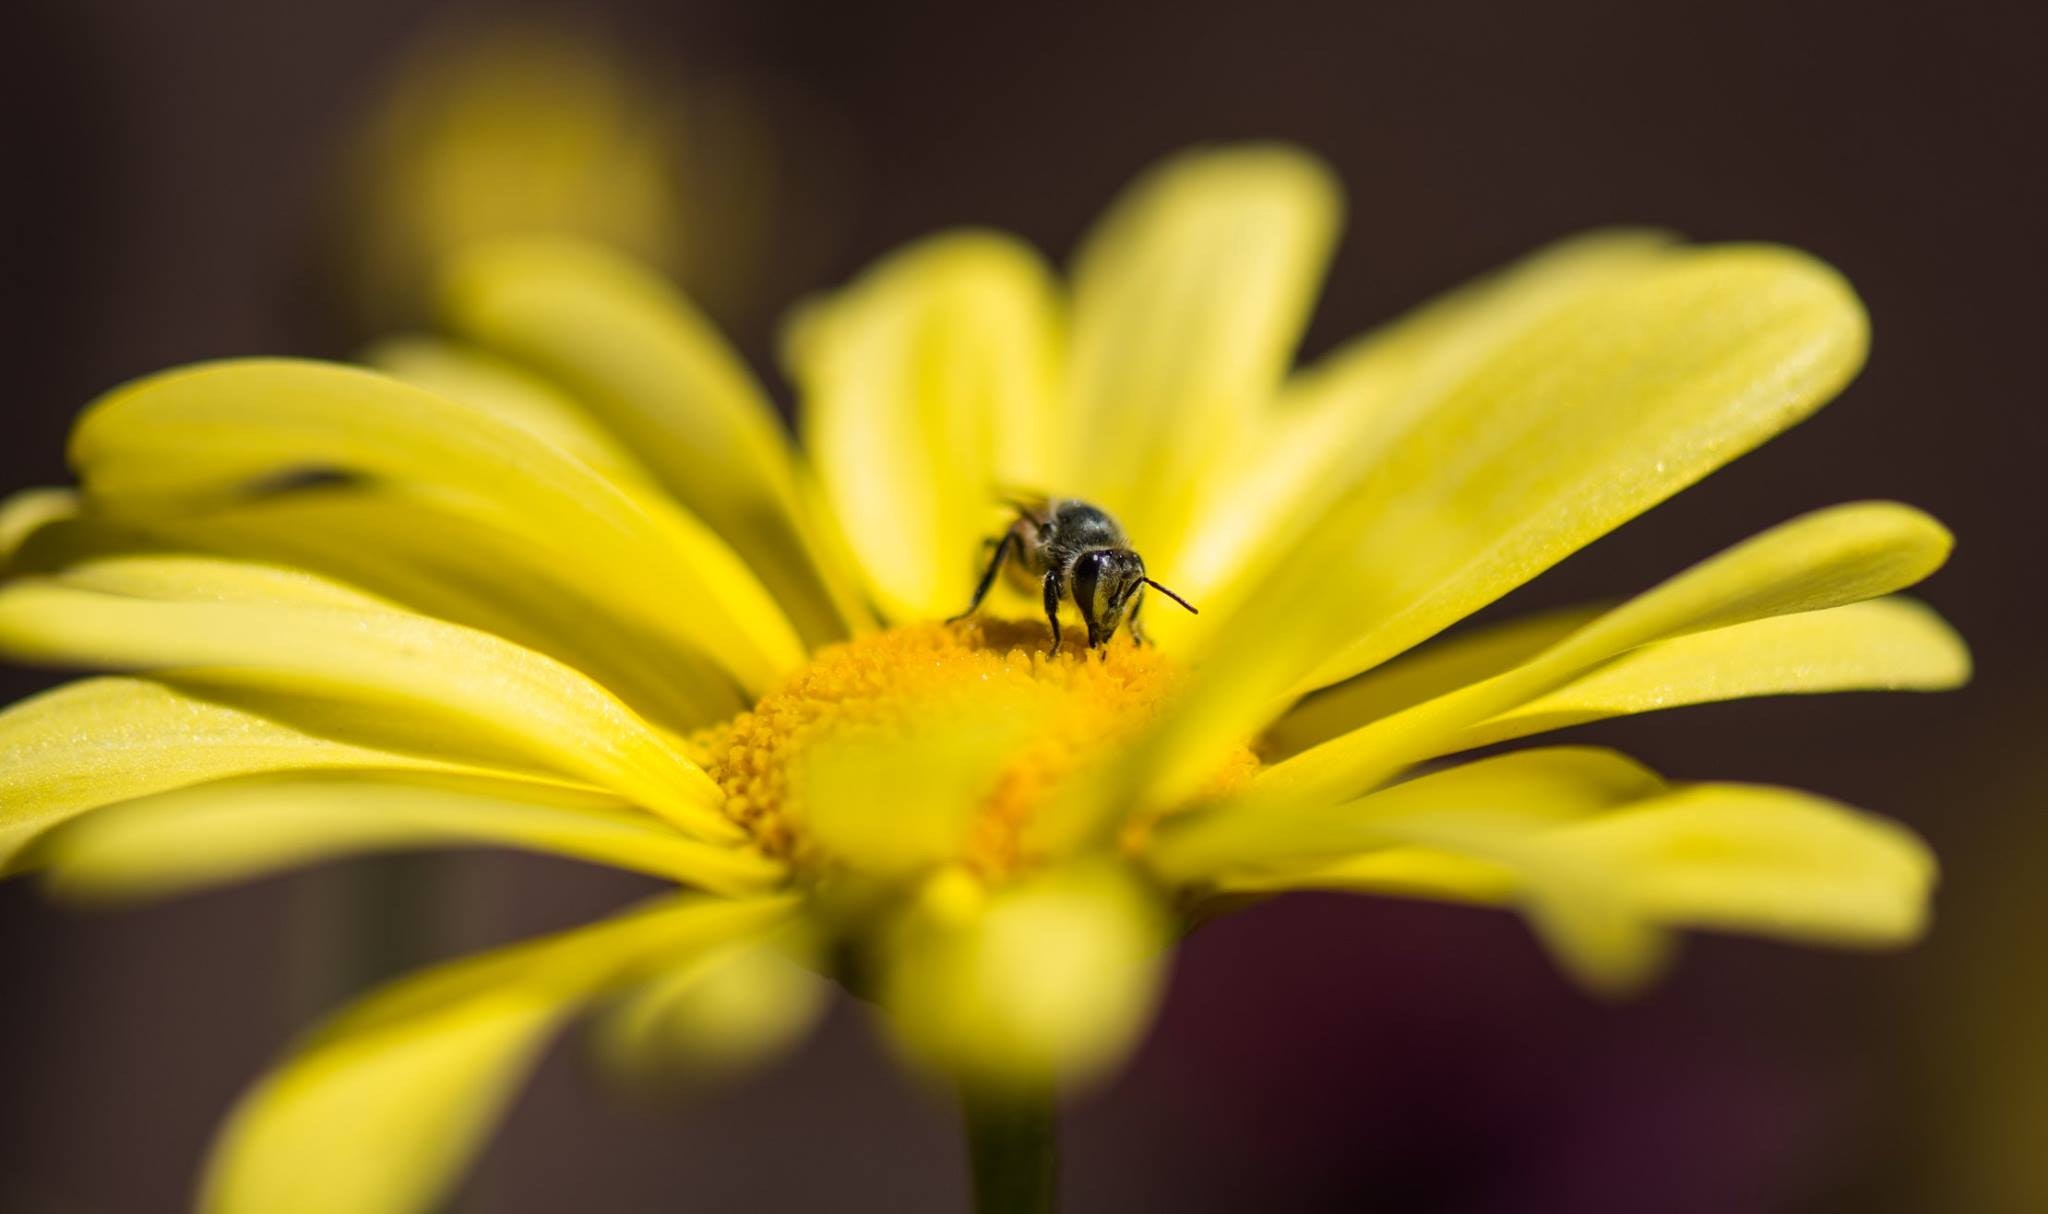 Honeybee perched on yellow petaled flower in closeup photo